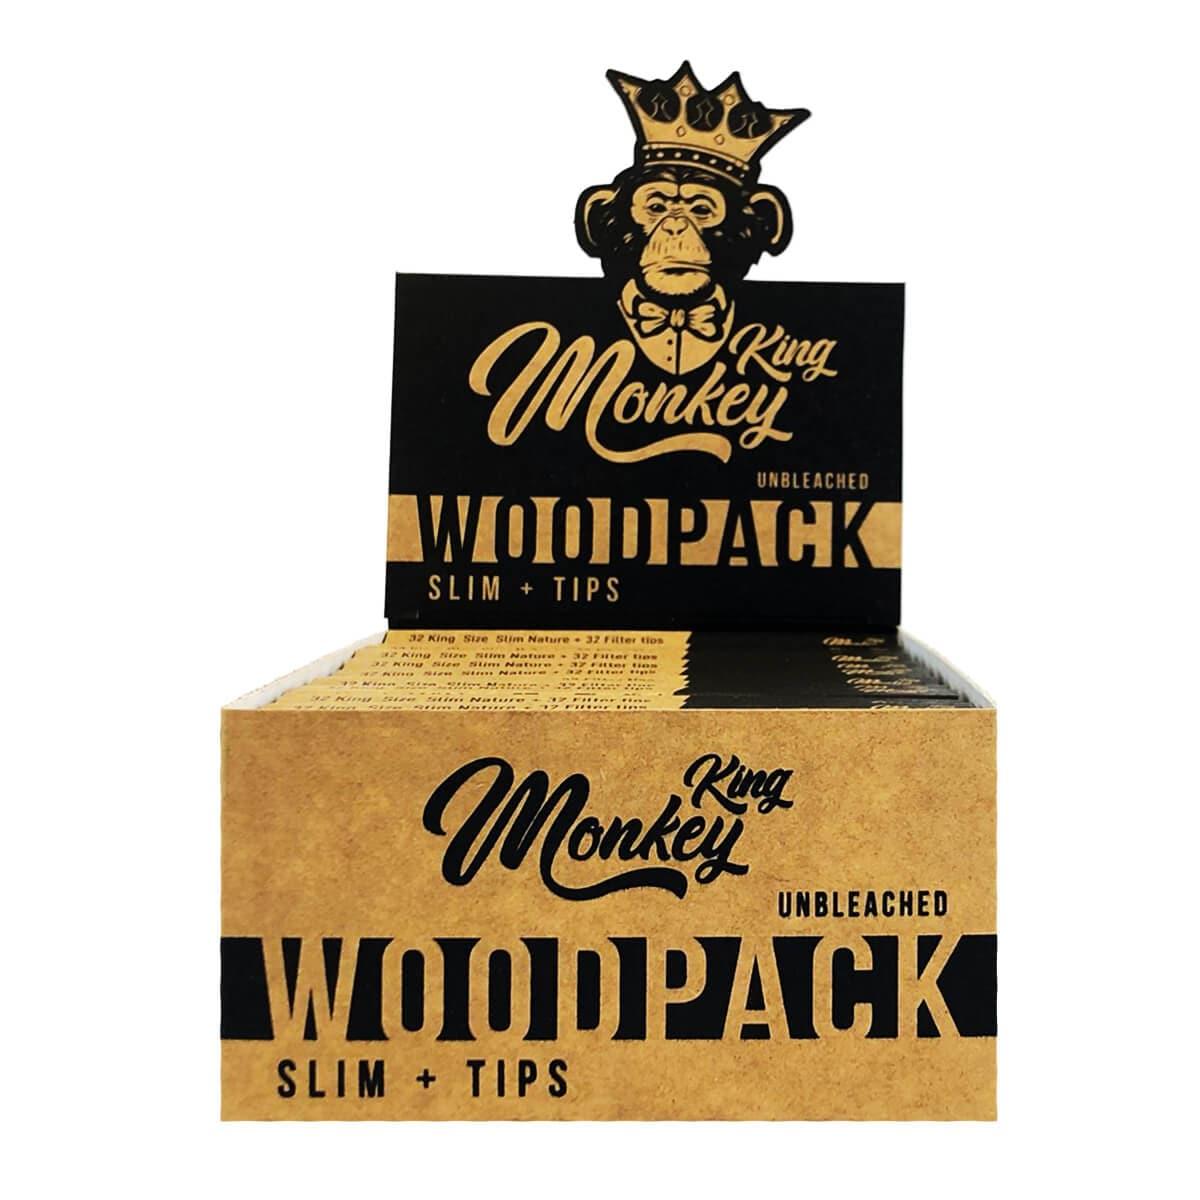 Monkey King's Woodpack Unbleached Rolling Paper + Tips - HAPPYTRAIL